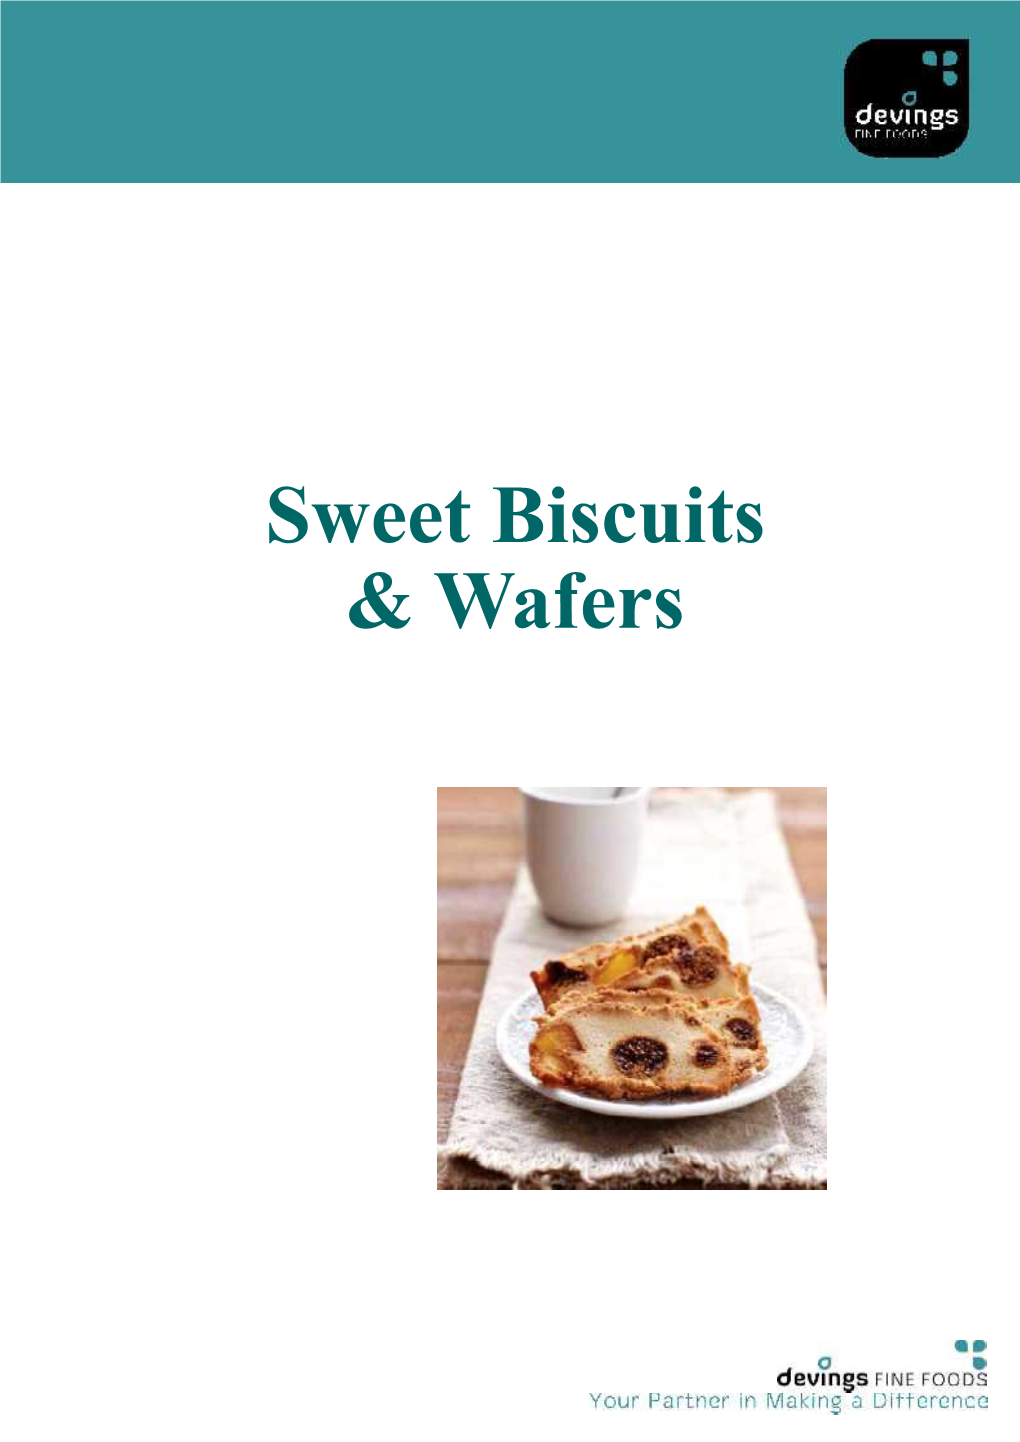 Sweet Biscuits & Pastries